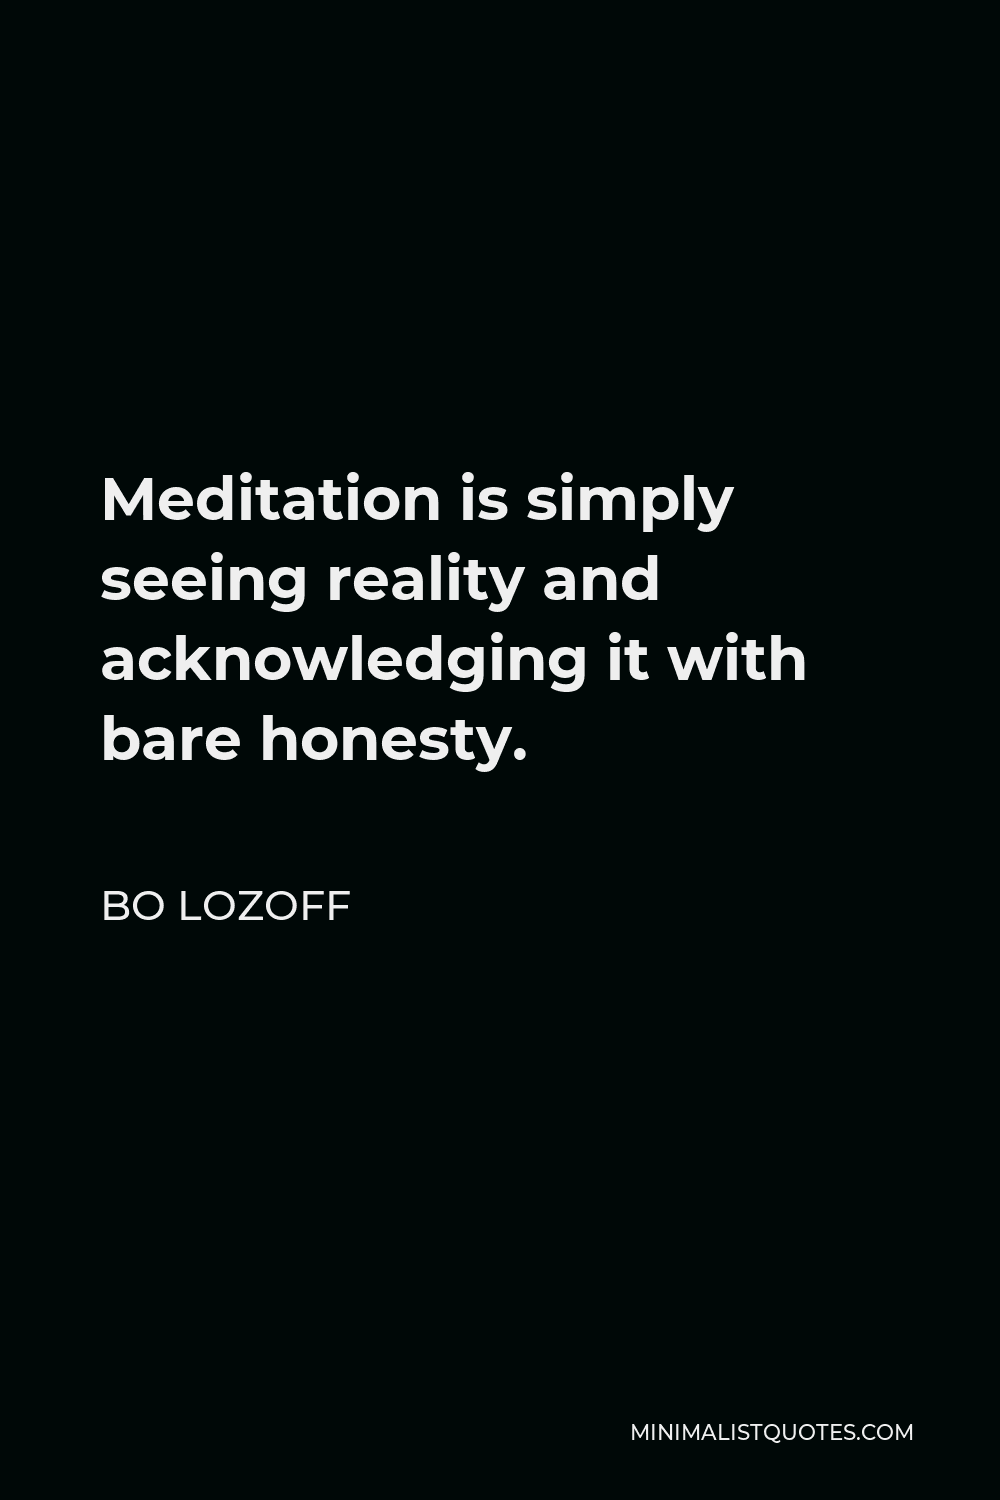 Bo Lozoff Quote - Meditation is simply seeing reality and acknowledging it with bare honesty.